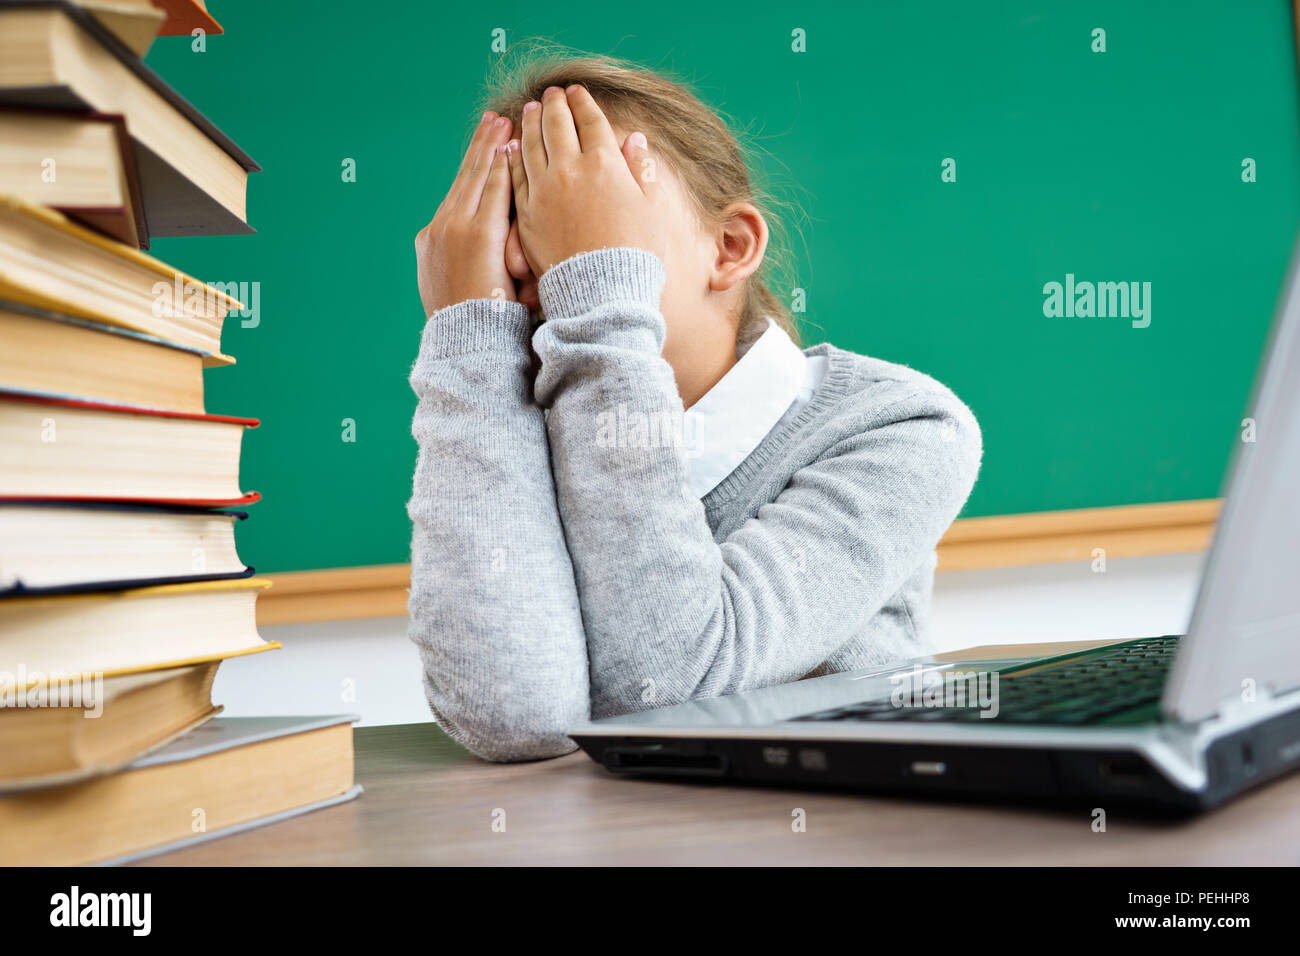 Schoolgirl closed her eyes and crying. Photo of little girl in classroom around books. Education concept Stock Photo